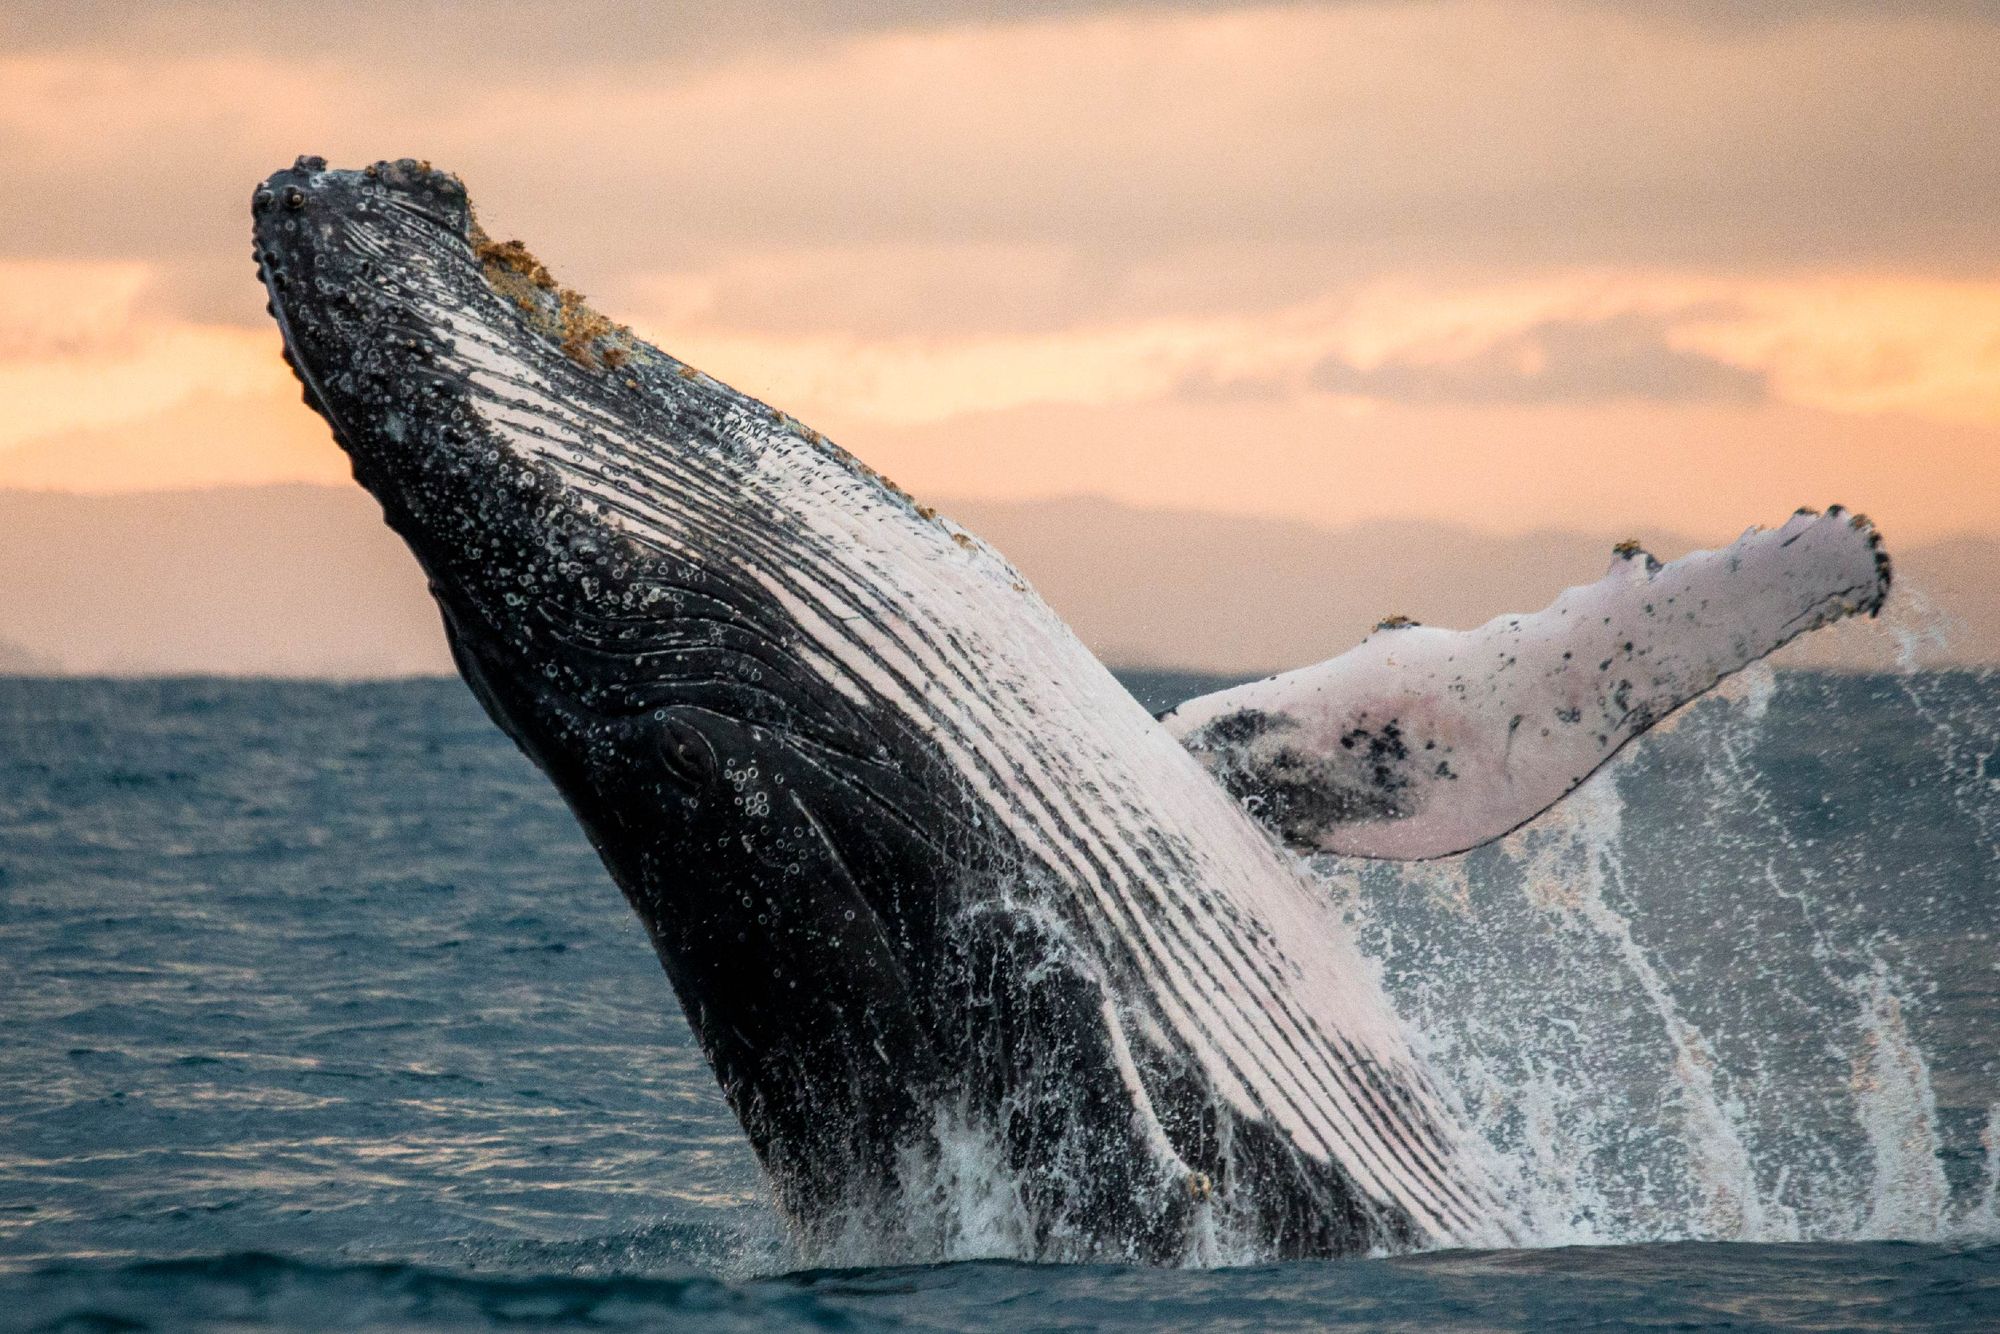 Whales are coming to life, as evidenced by today's transaction of 4,997 BTCs